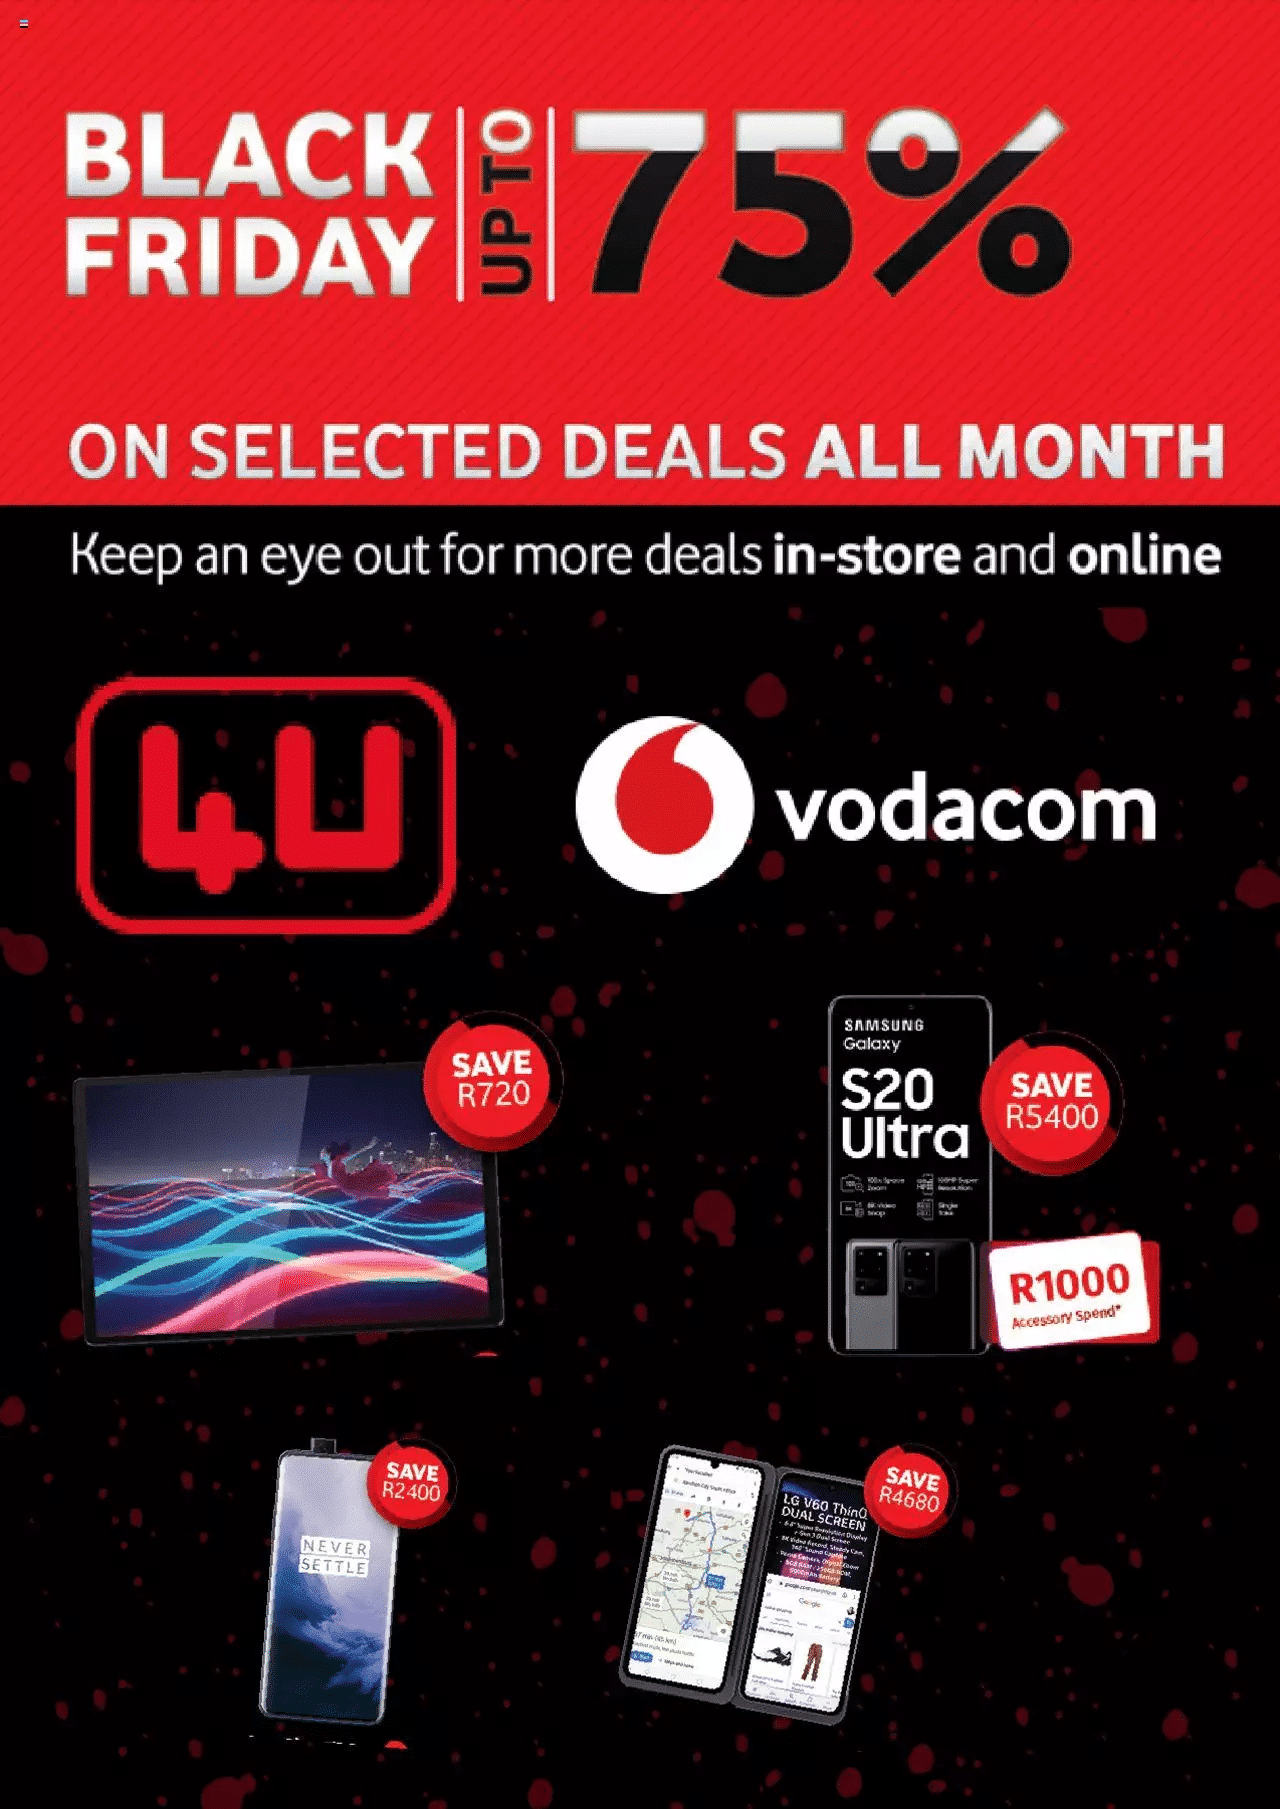 Vodacom Black Friday Deals & Specials 2021 - Will Be Black Friday Deals This Year